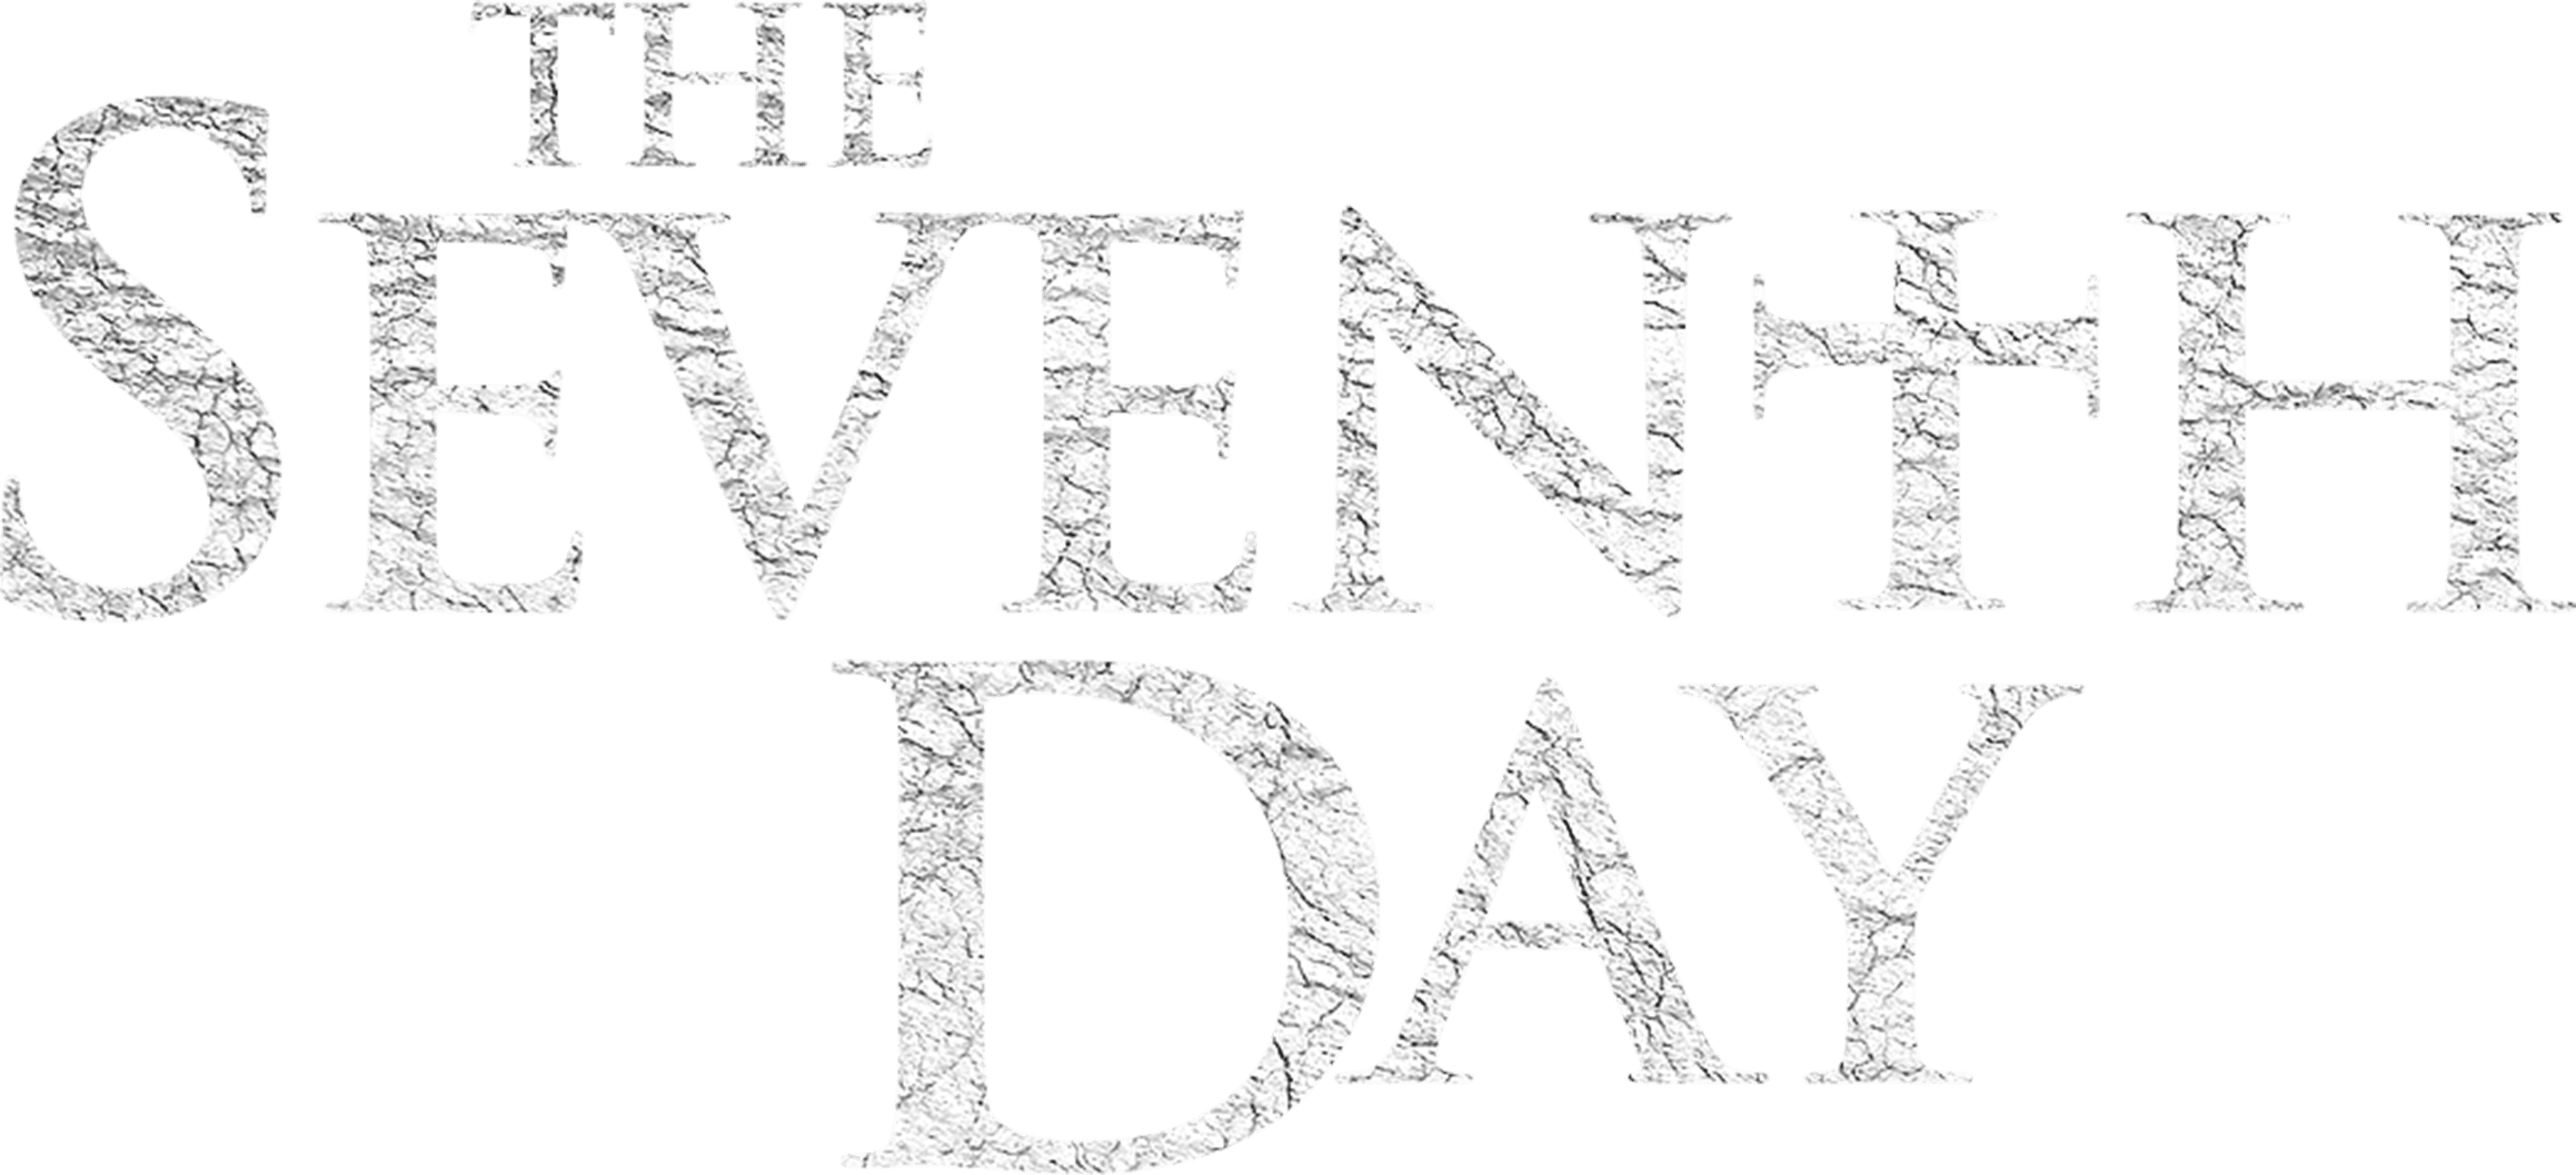 The Seventh Day logo